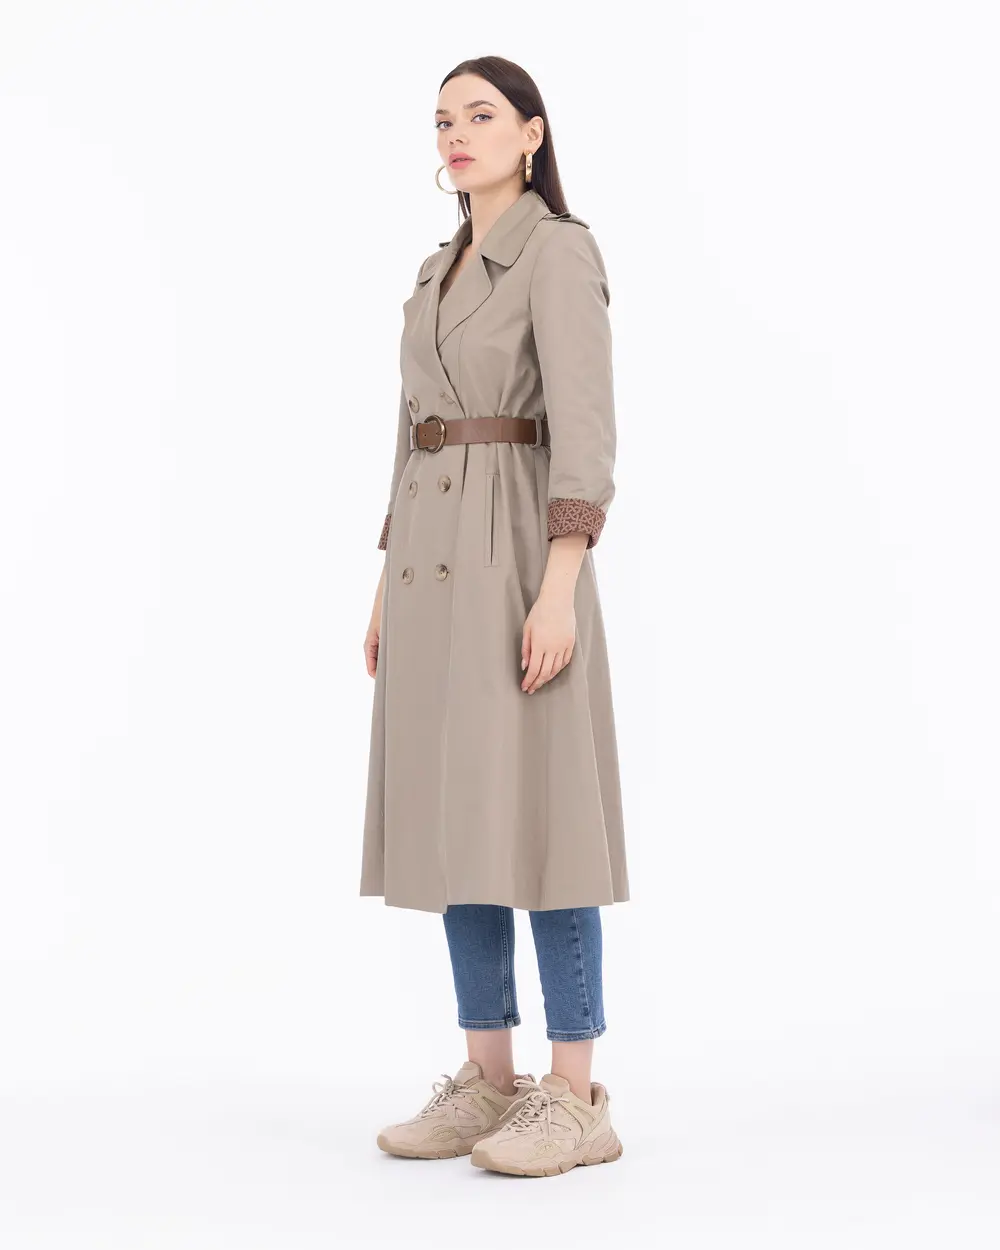 Patterned Lined Classic Trench Coat with Belt